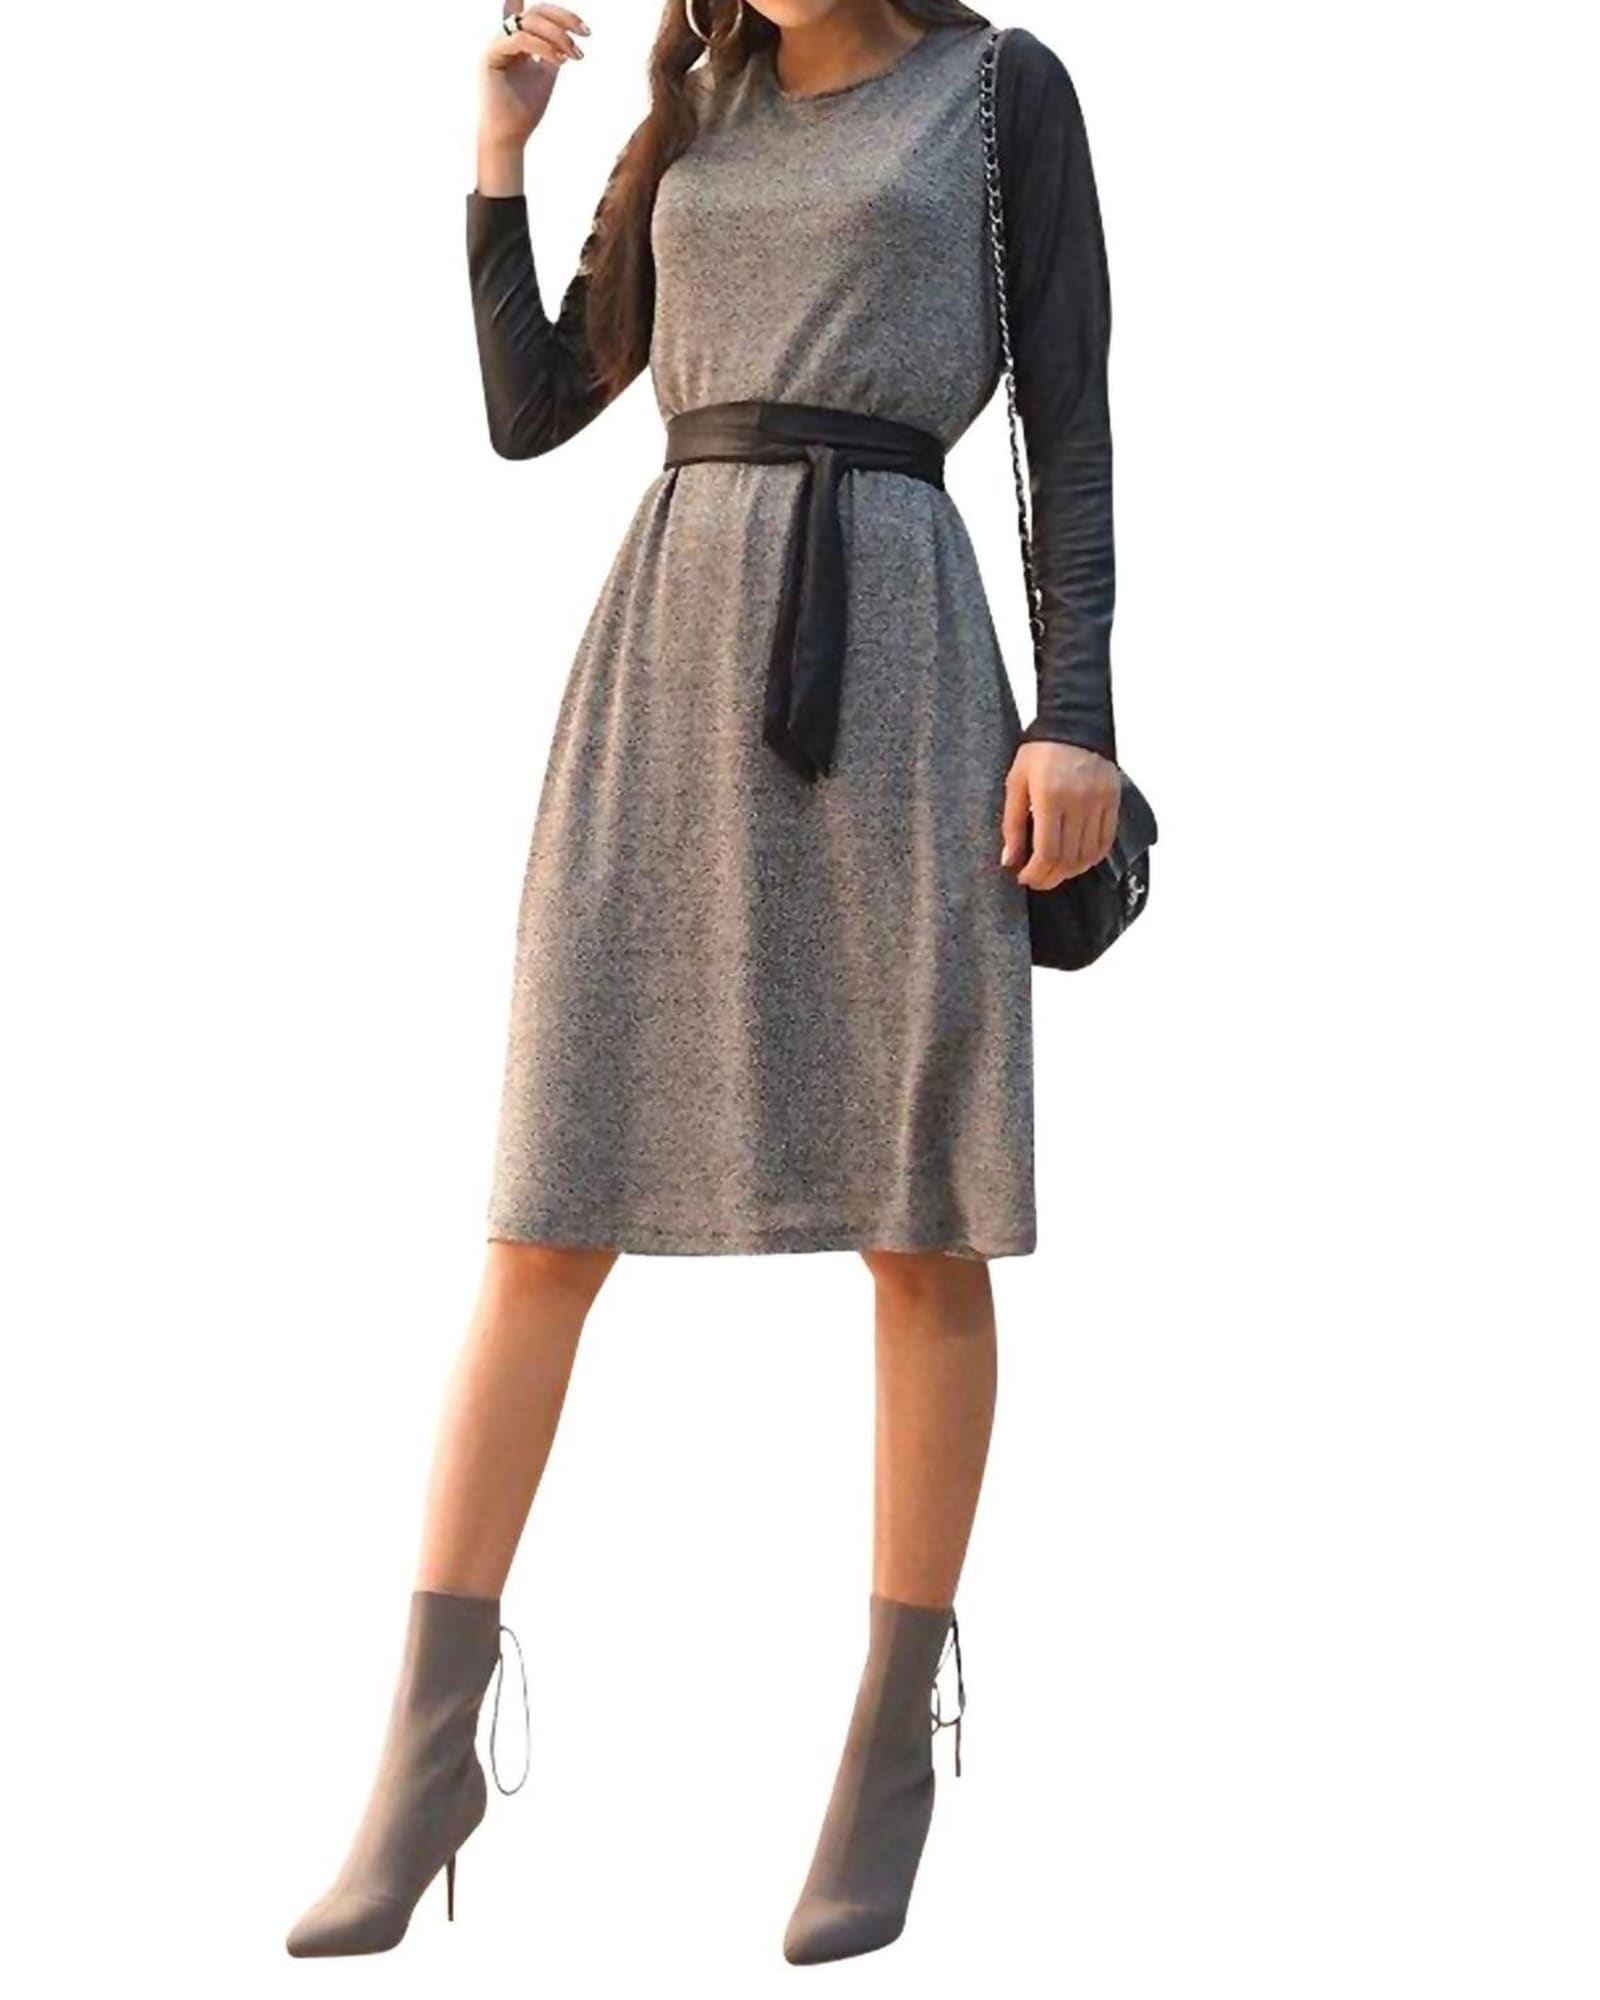 Leather Sleeve Dress In Black And Grey | Black And Grey